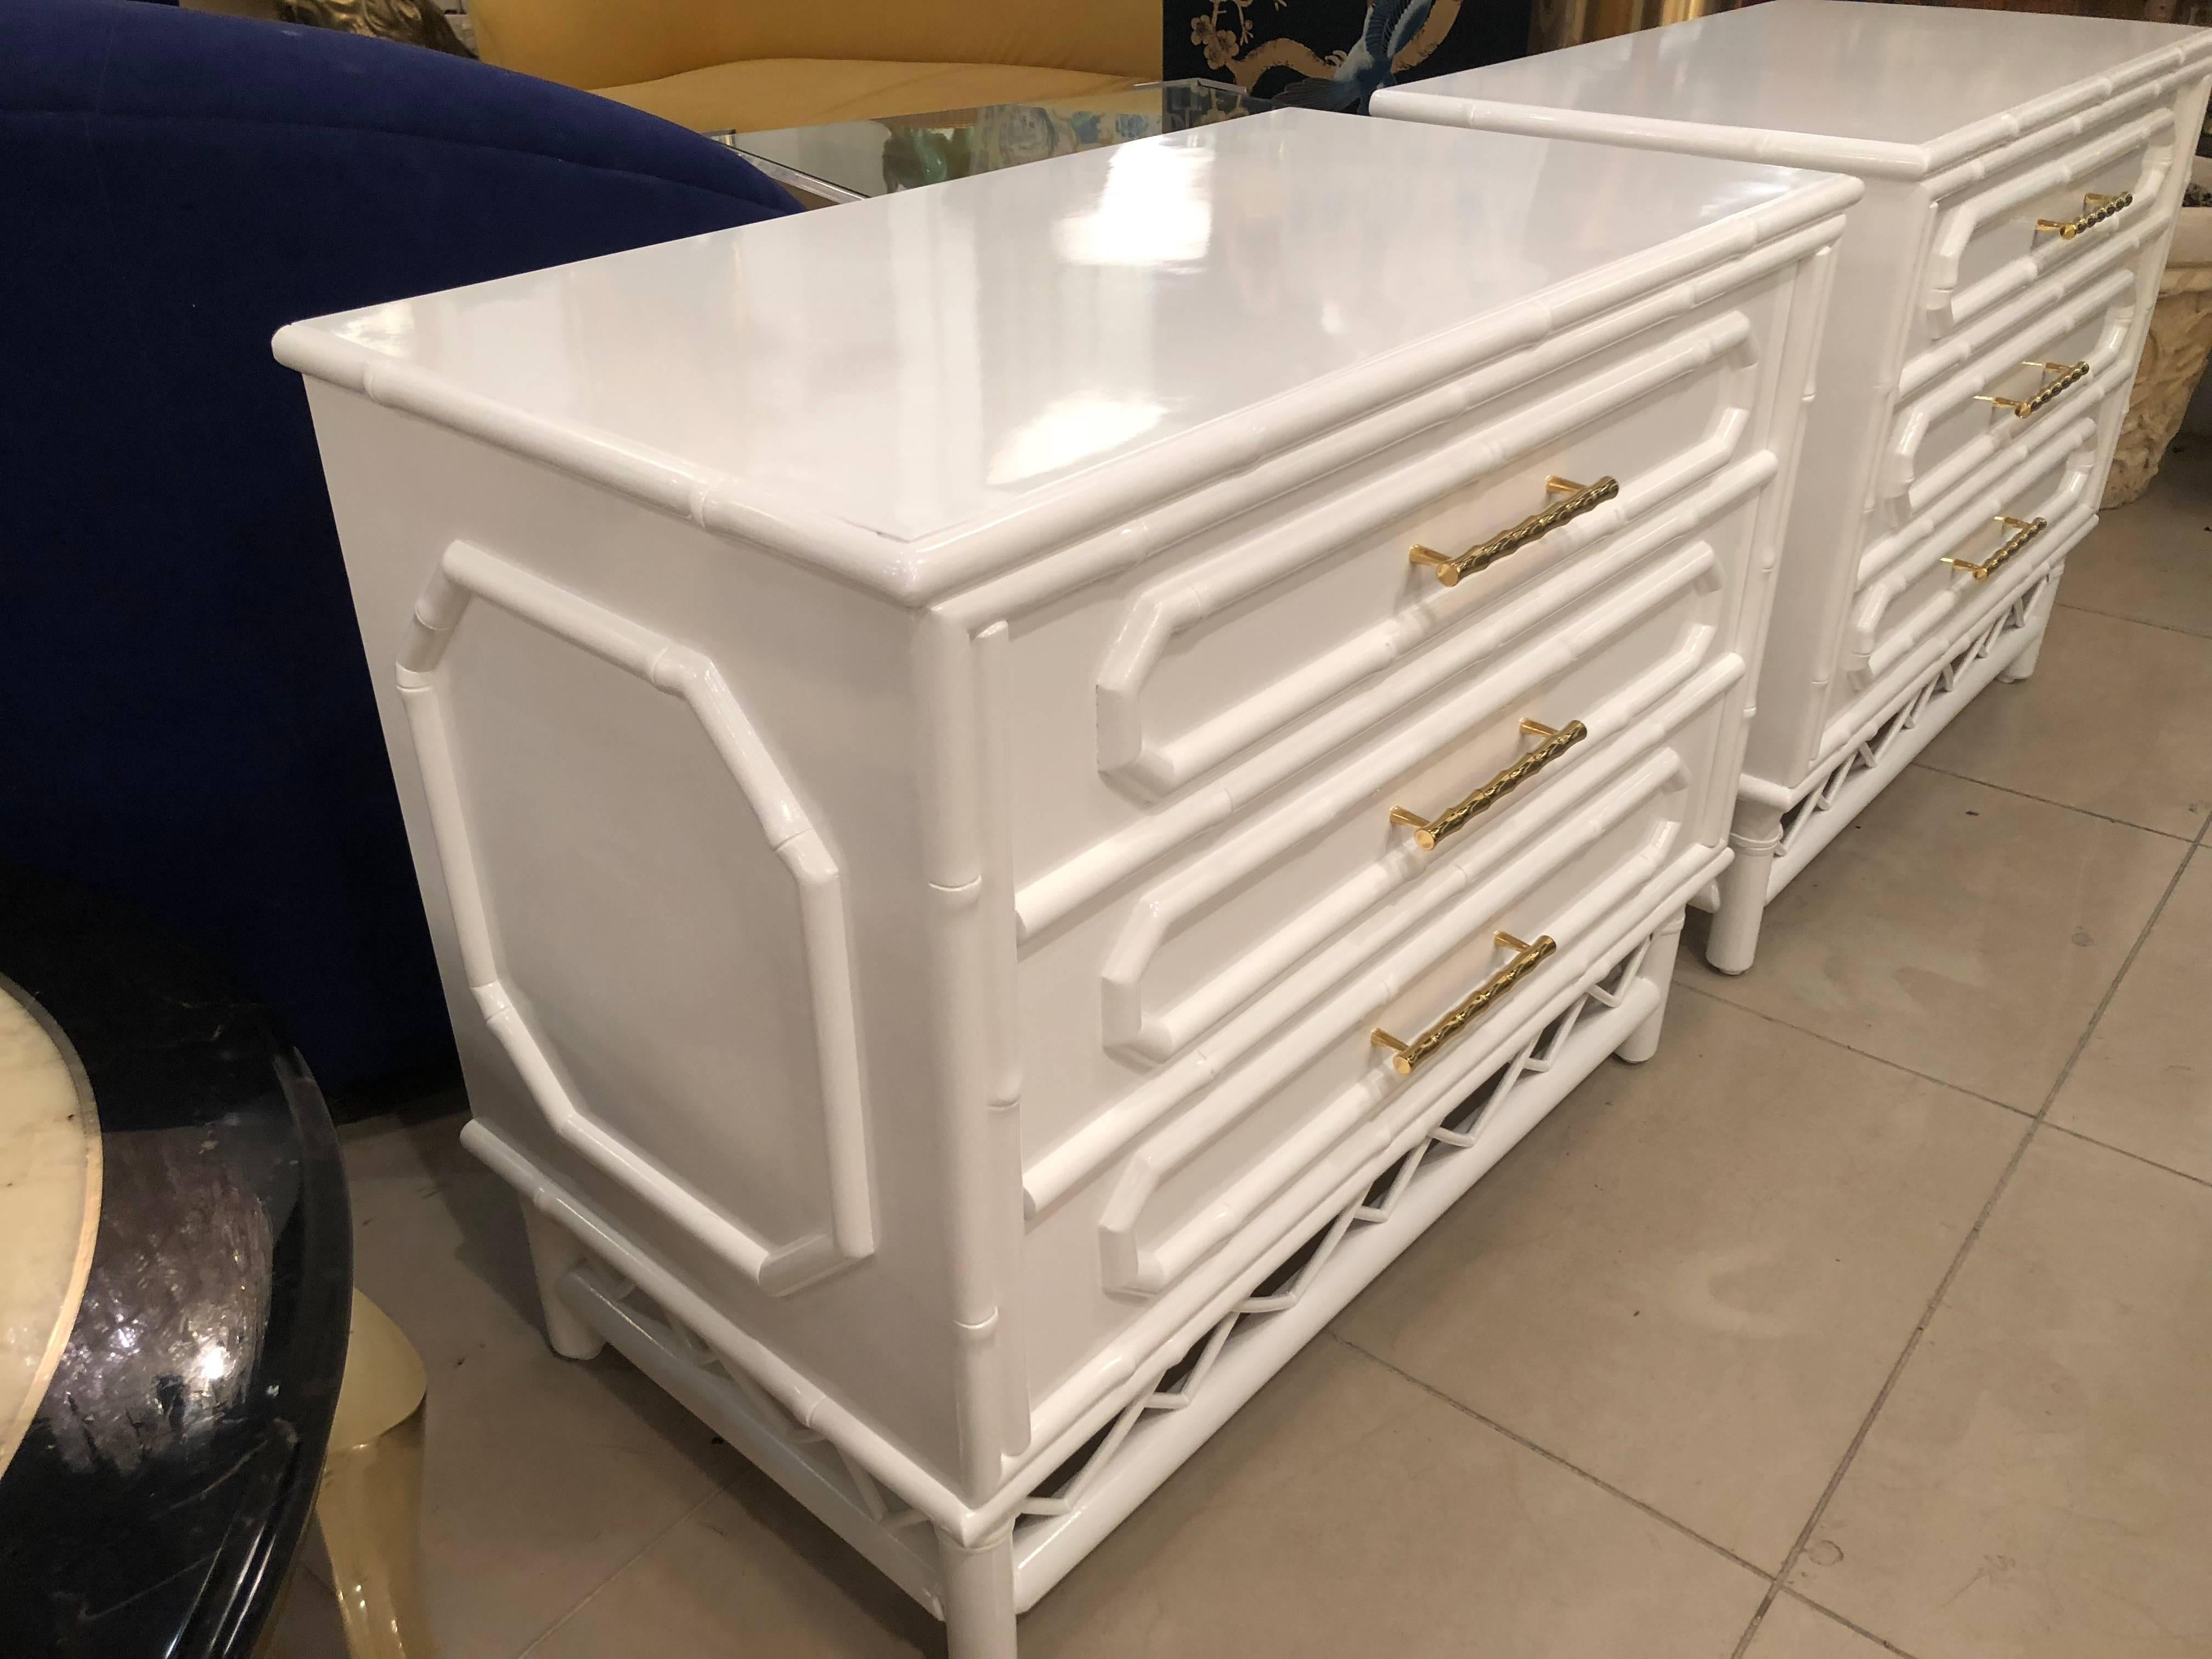 Fabulous Ficks Reed pair of vintage faux bamboo, Chinese Chippendale three-drawer chests nightstands. Rattan bottom, faux bamboo brass hardware. Professionally restored. White gloss lacquer including inside the drawers and back. Perfect Palm beach